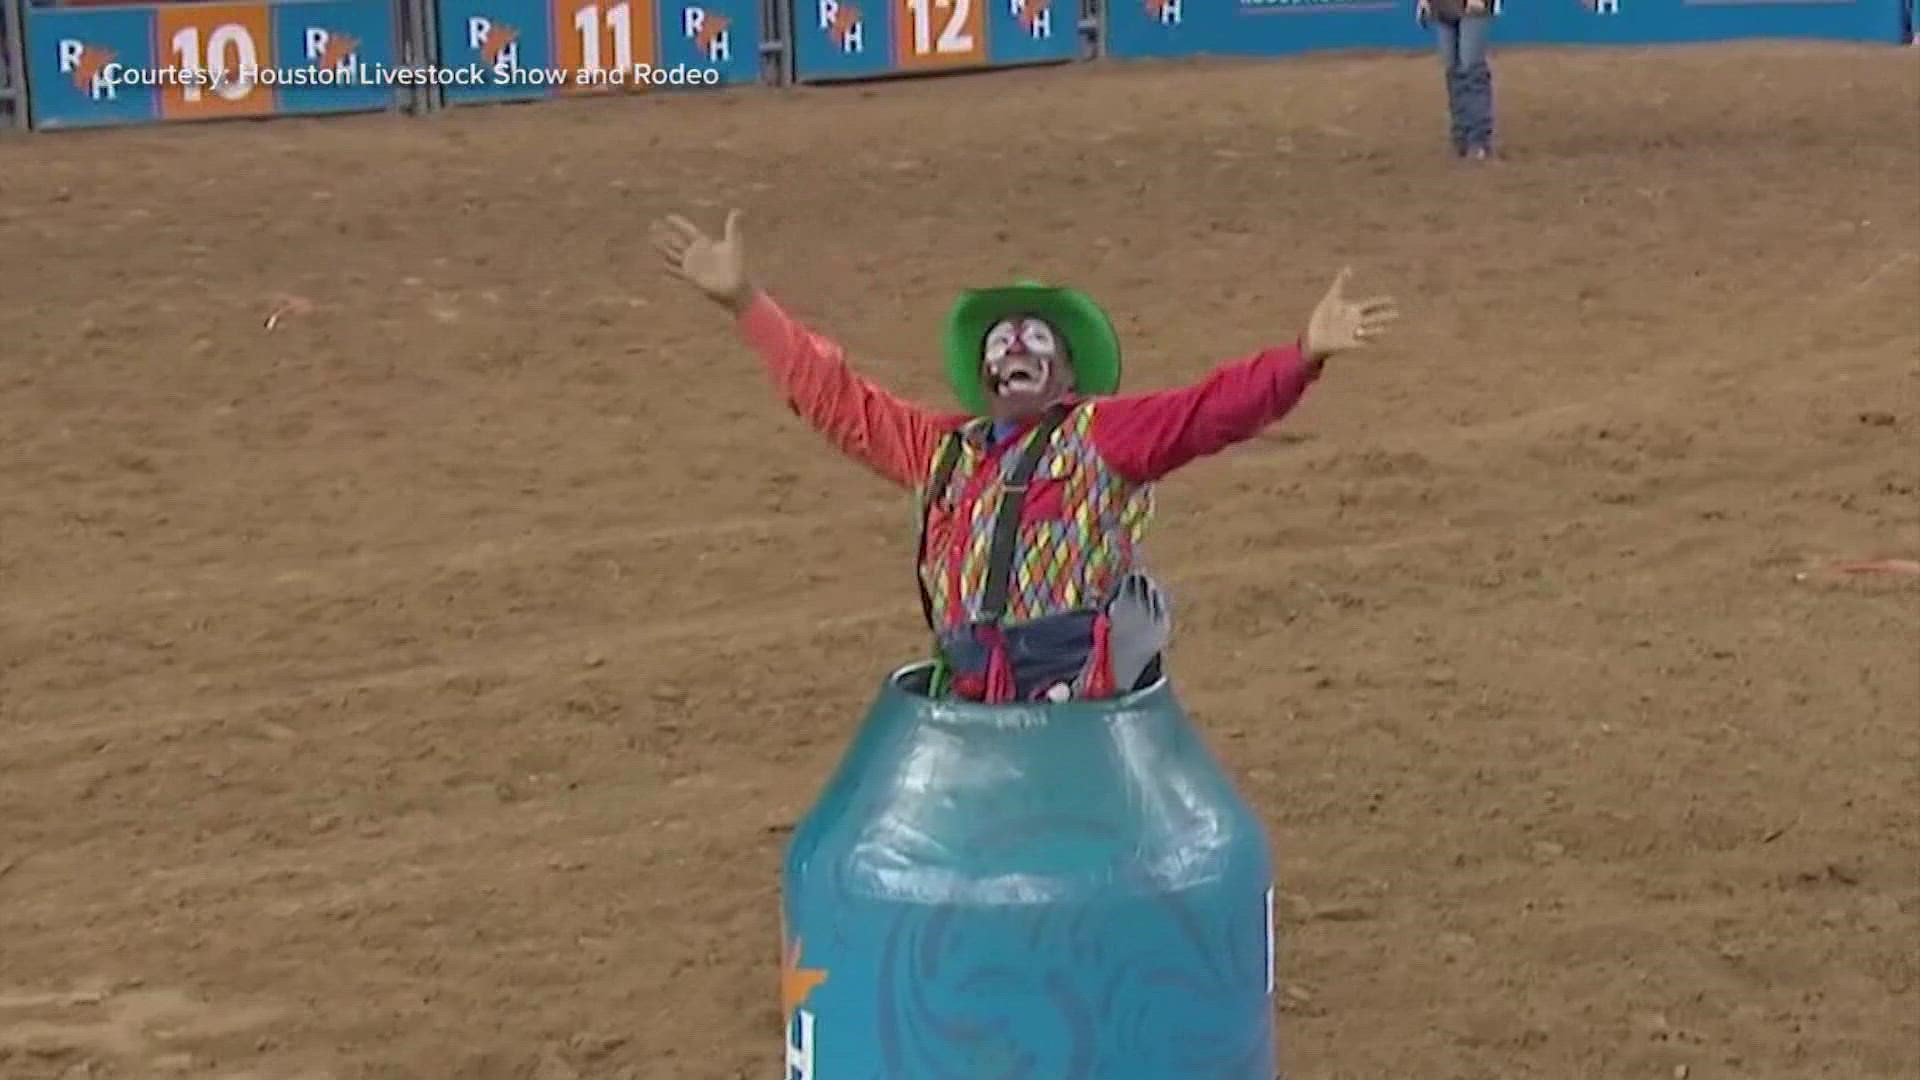 Coffee, the rockstar of rodeo clowns who stares down bulls for a living, has delighted RodeoHouston fans for 30 years.